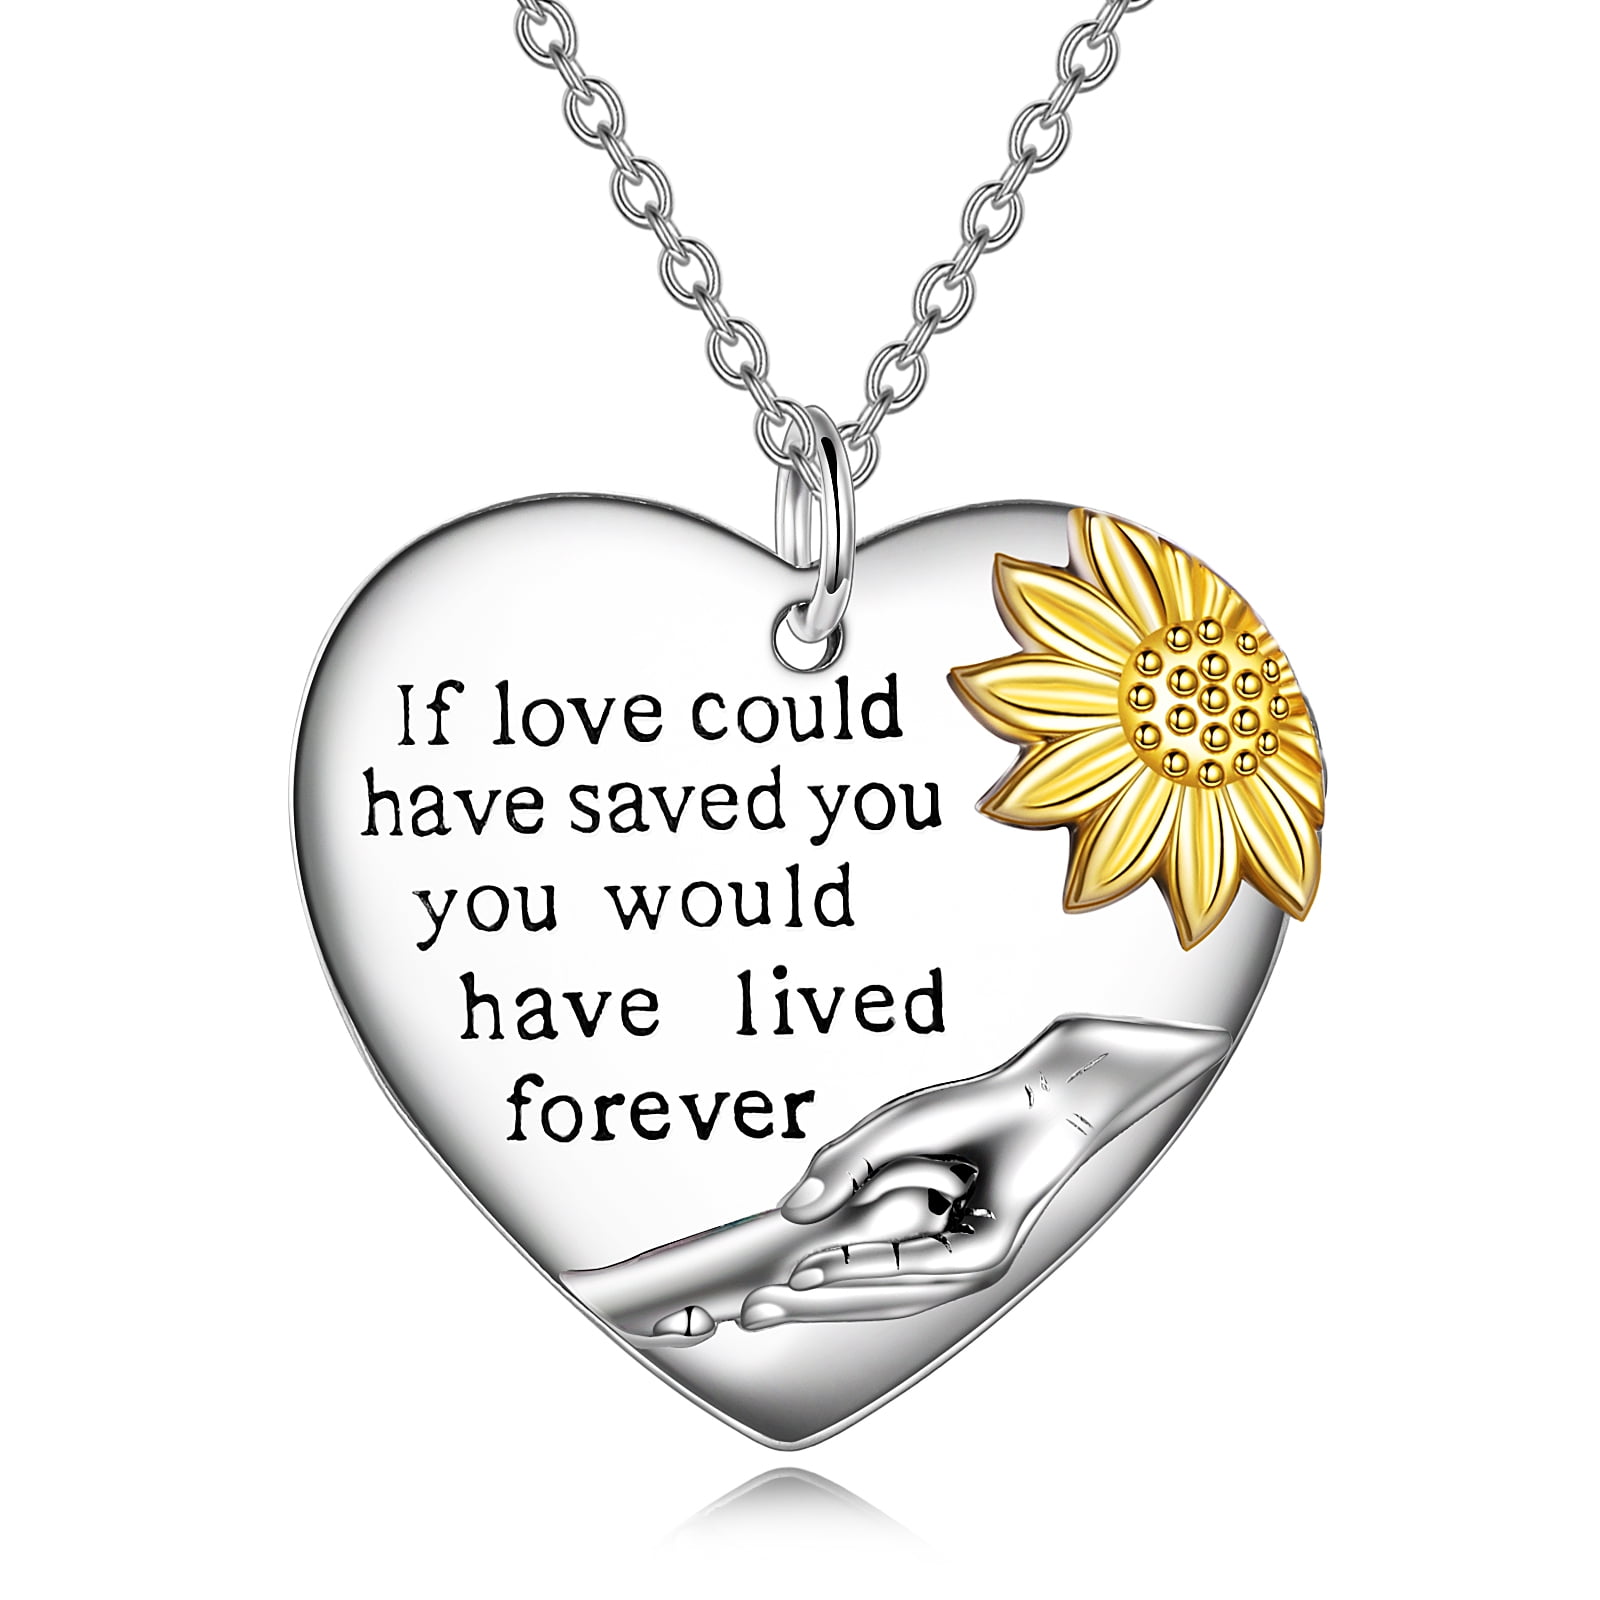 Necklace with Pendant Heart with Paw 925 Real Silver Shake Necklace Ladies 